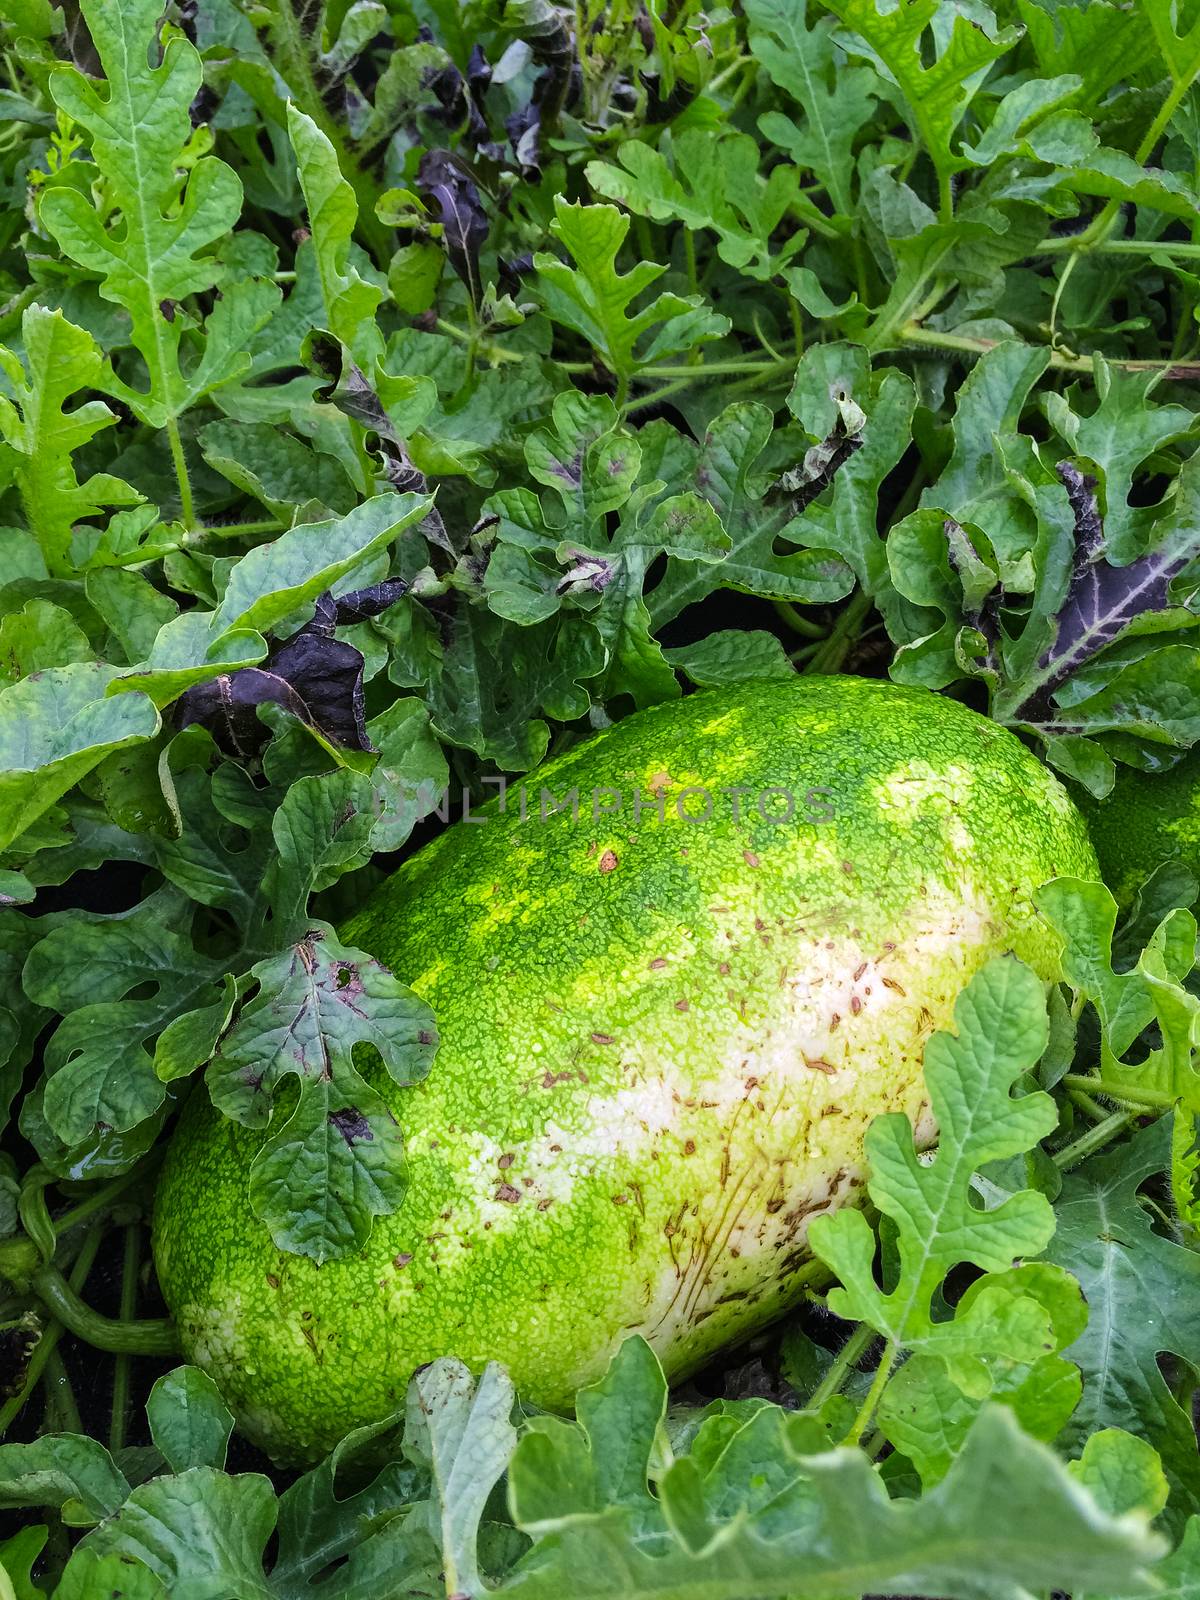 Watermelon growing in the field. Early autumn, Canada.